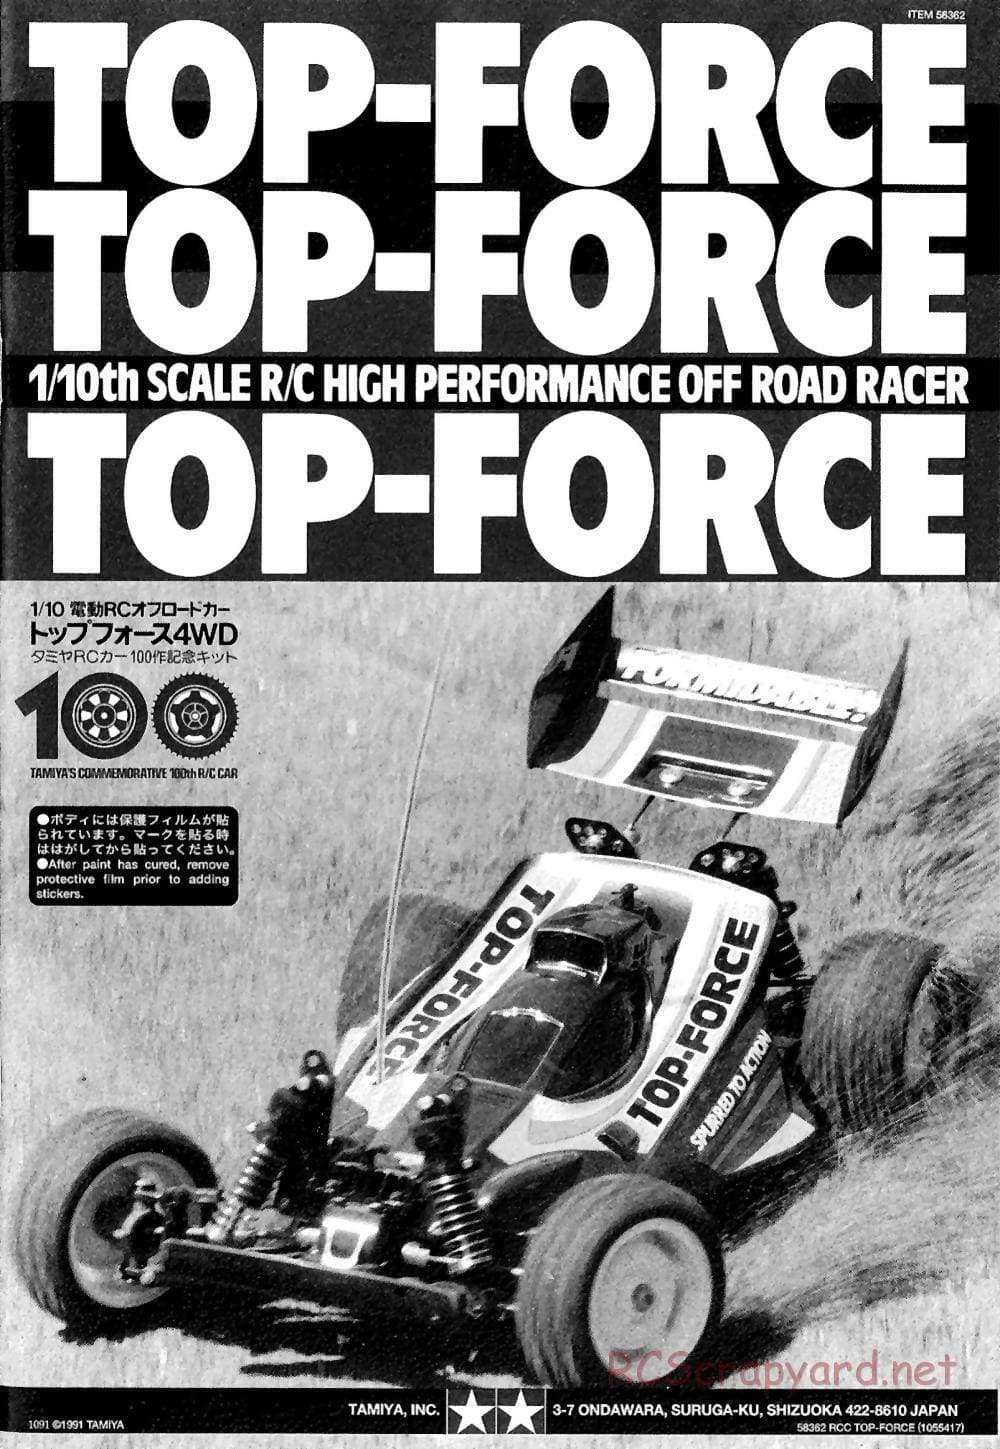 Tamiya - Top Force 2005 - DF-01 Chassis - Manual - Page 1